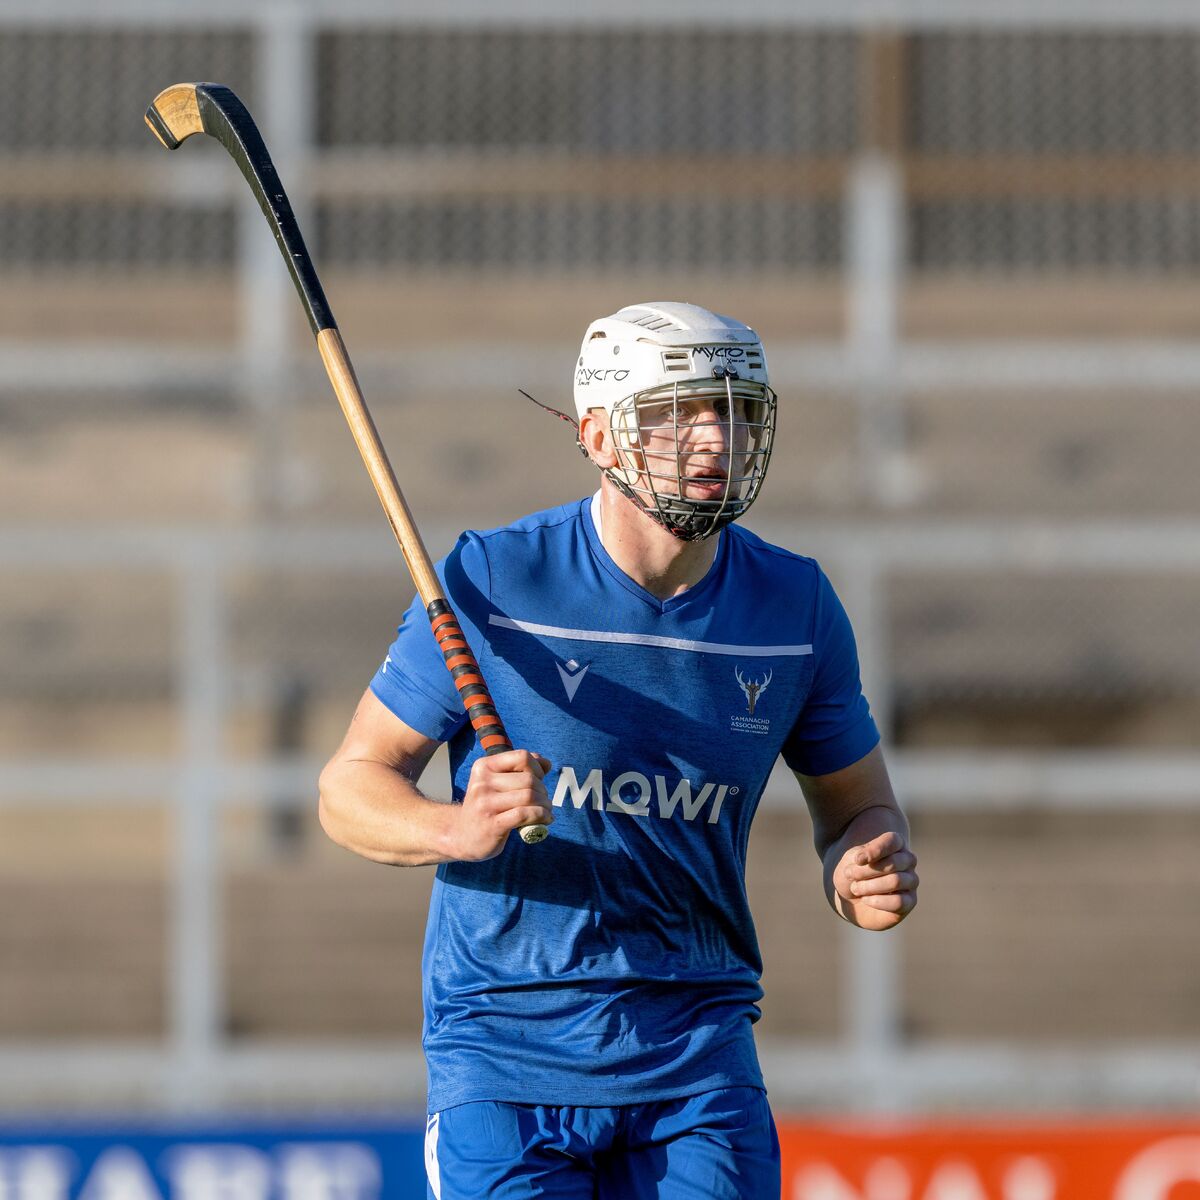 Mowi and shinty - a Scottish tradition